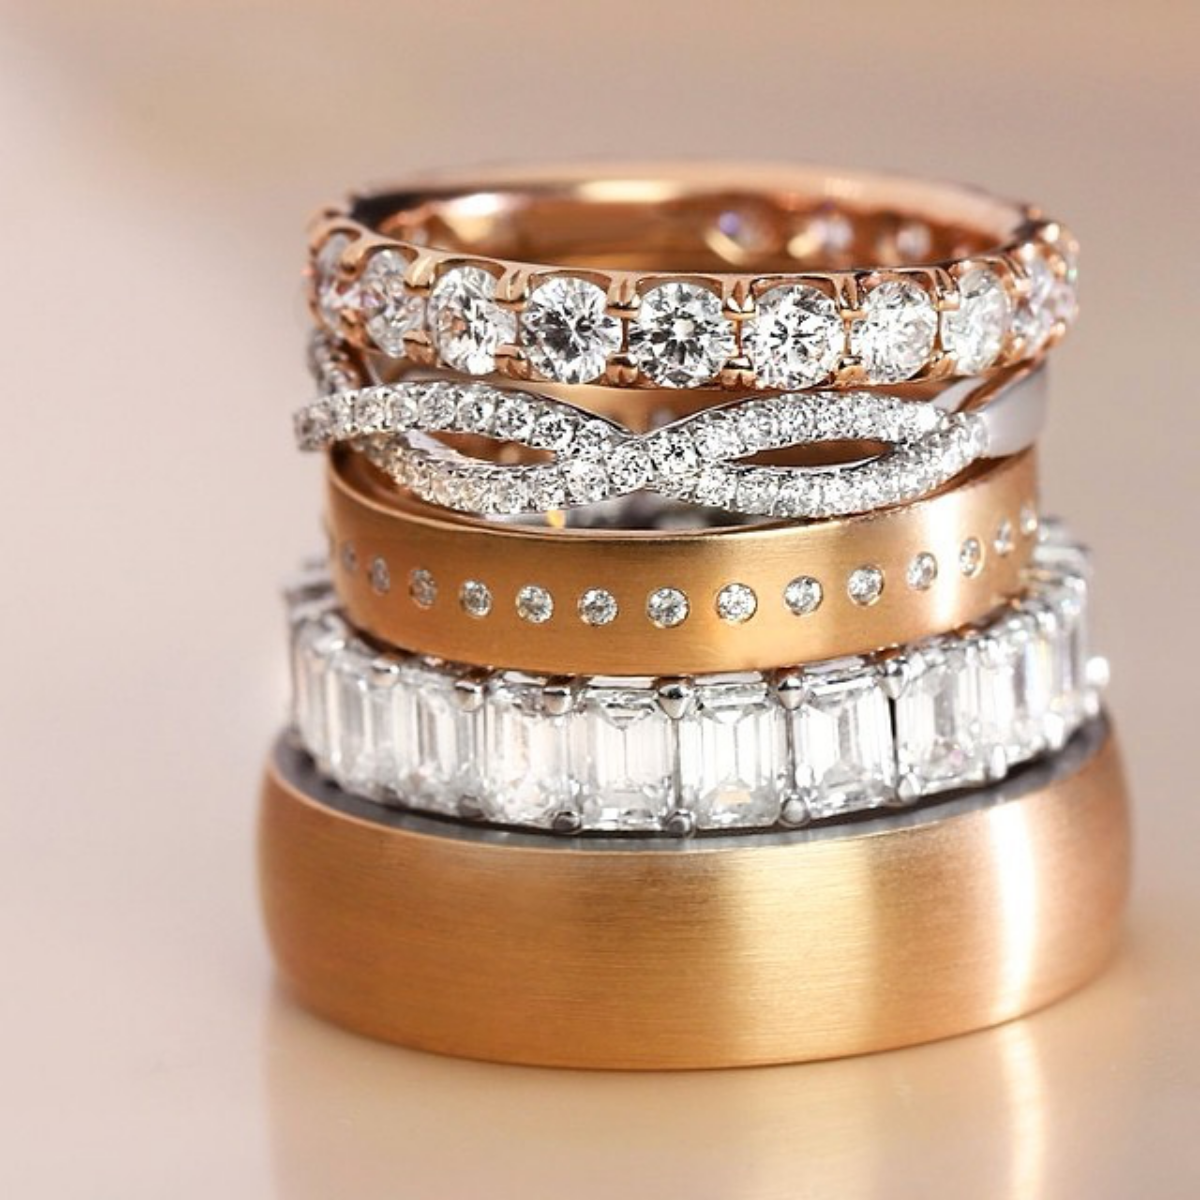 infinity band rings in pile